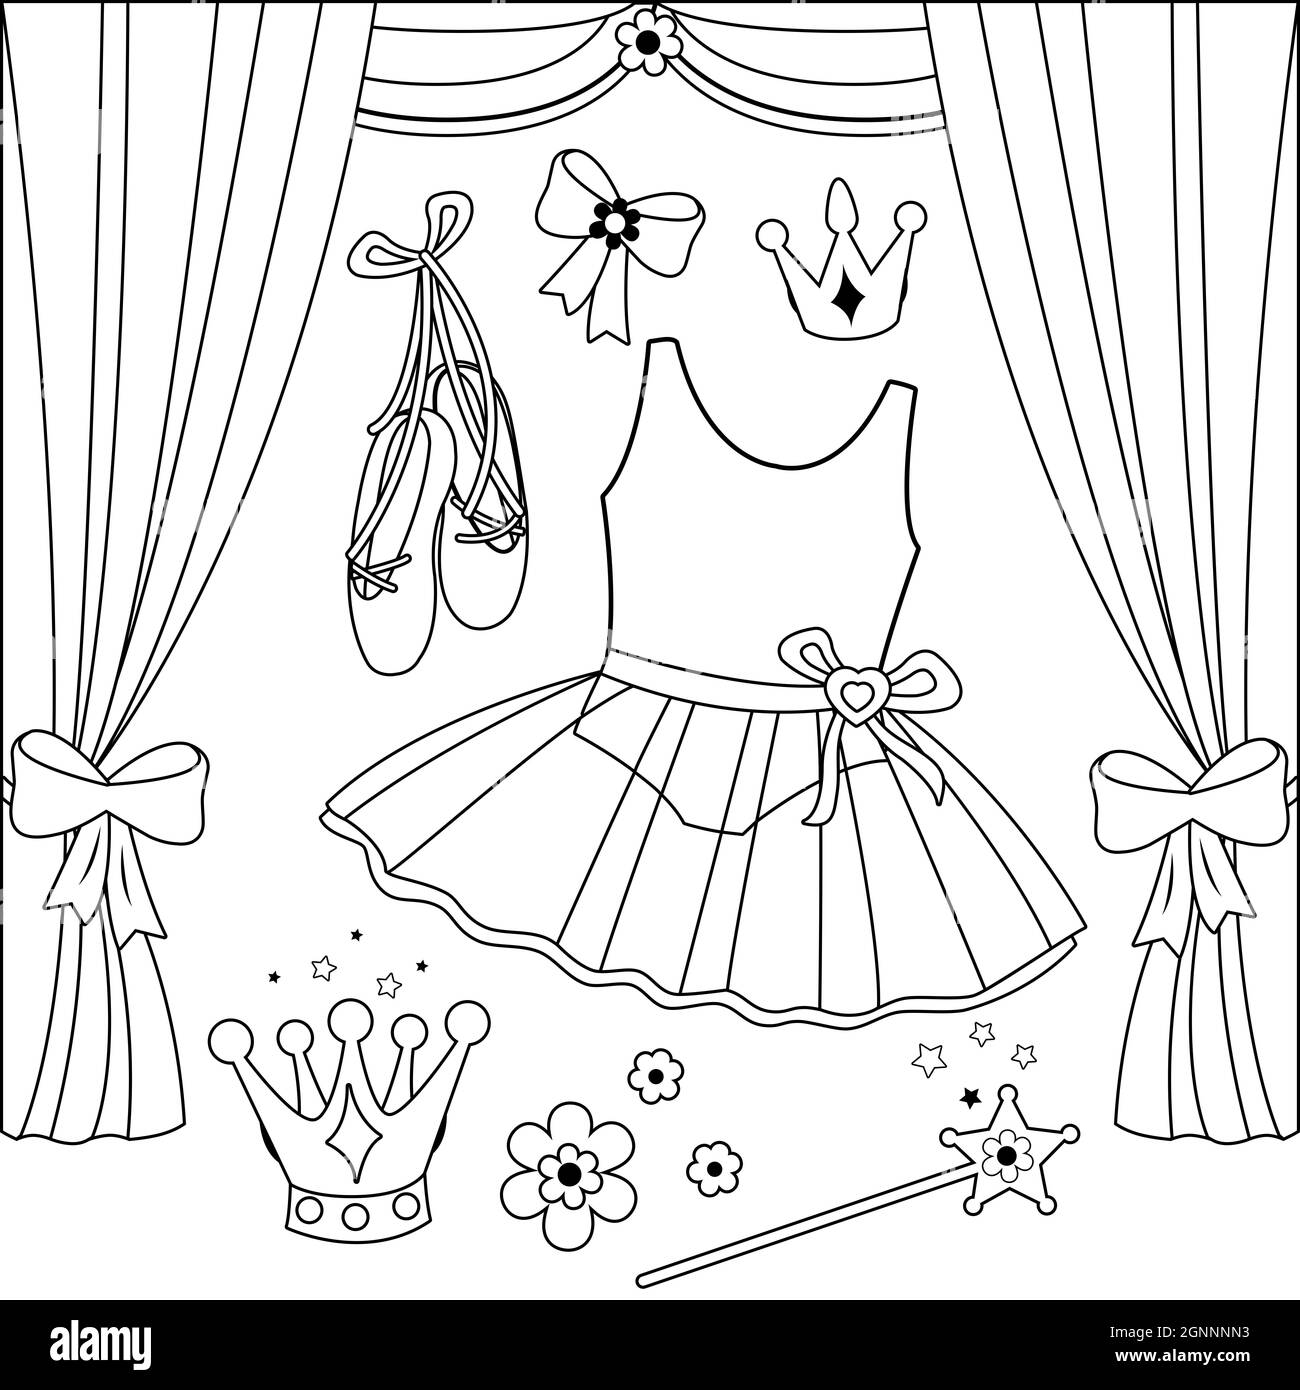 Ballet stage and dance accessories. Black and white coloring page. Stock Photo